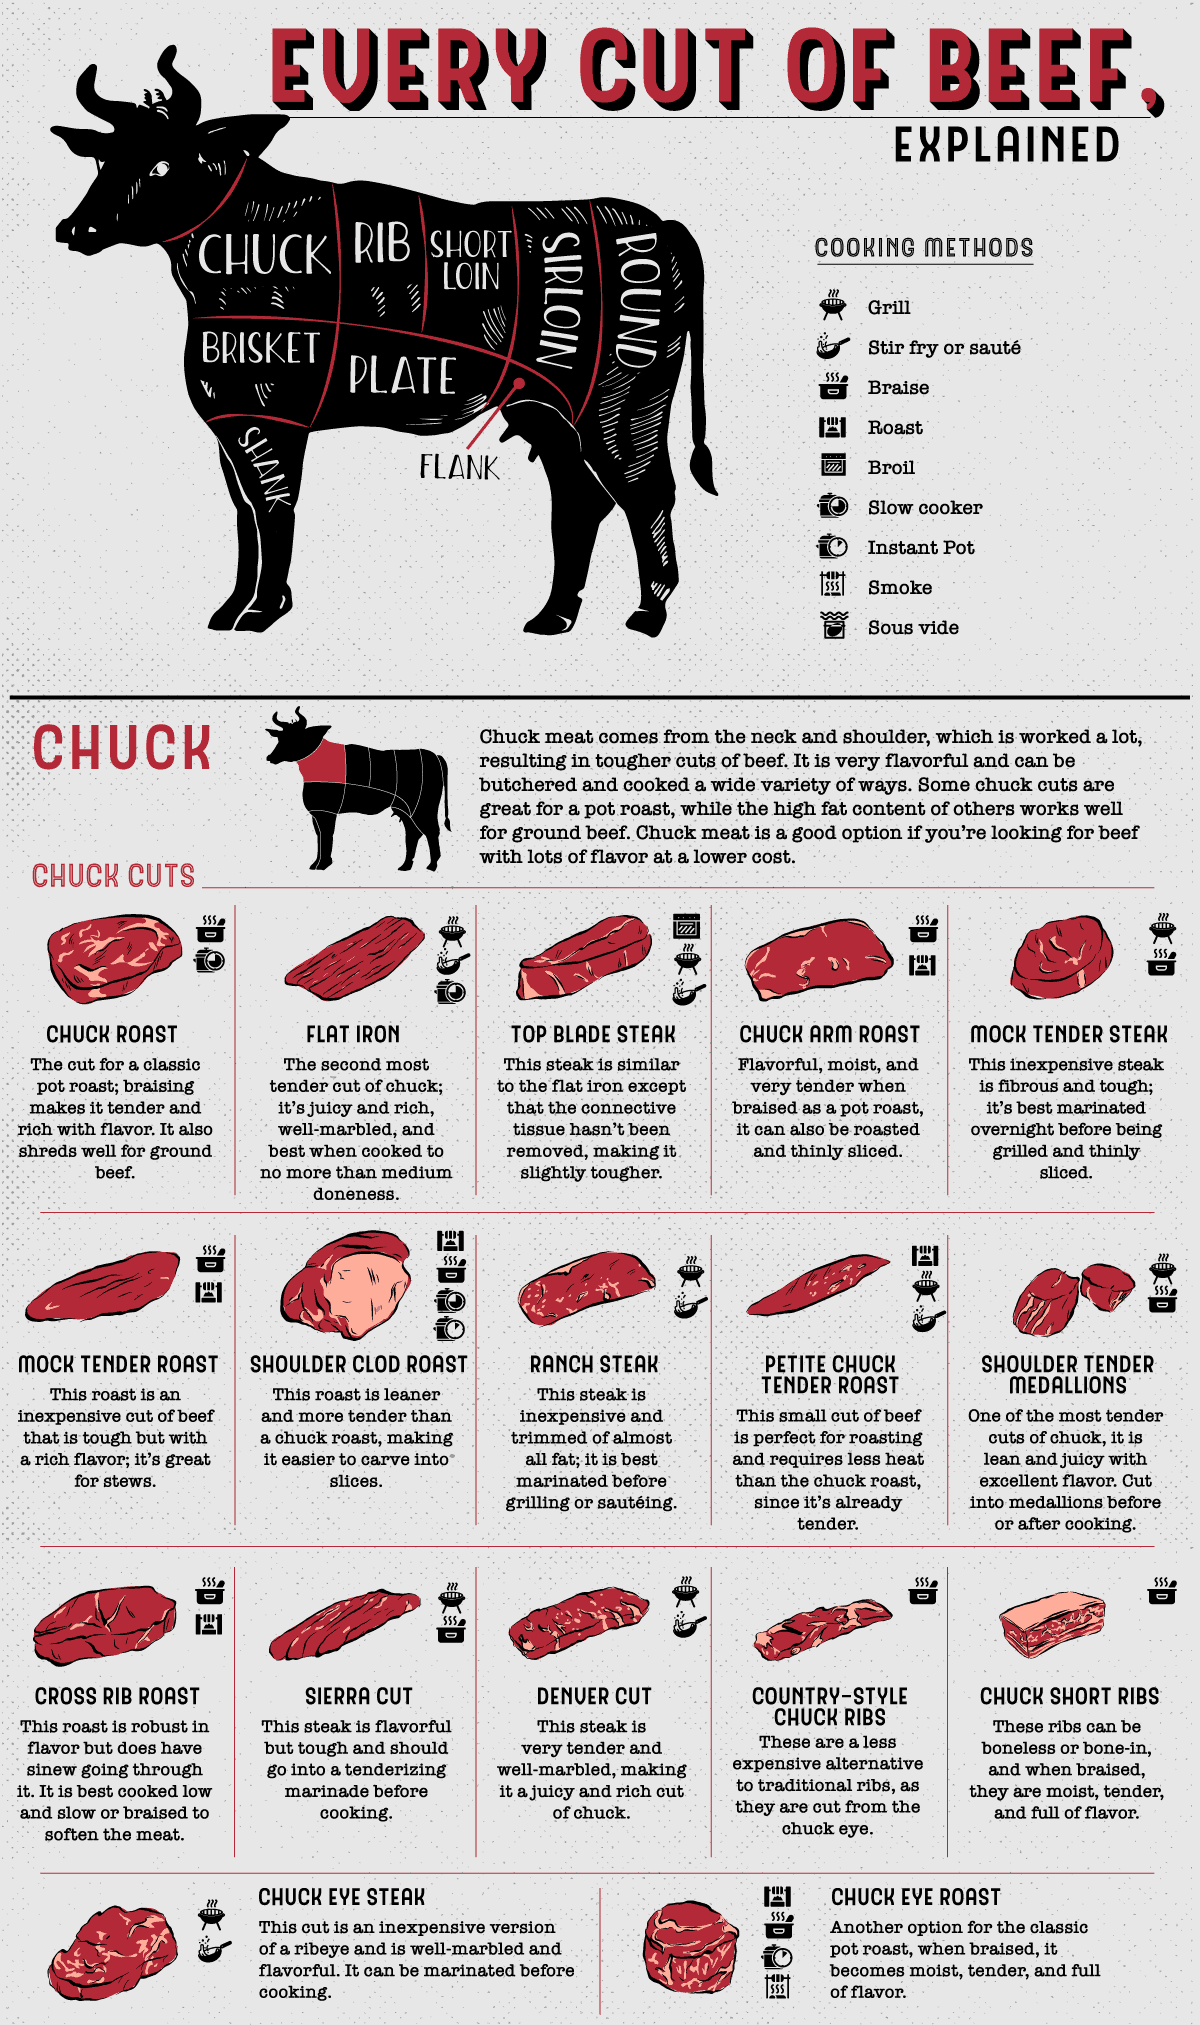 Complete-Guide-U.S. Cuts of Beef